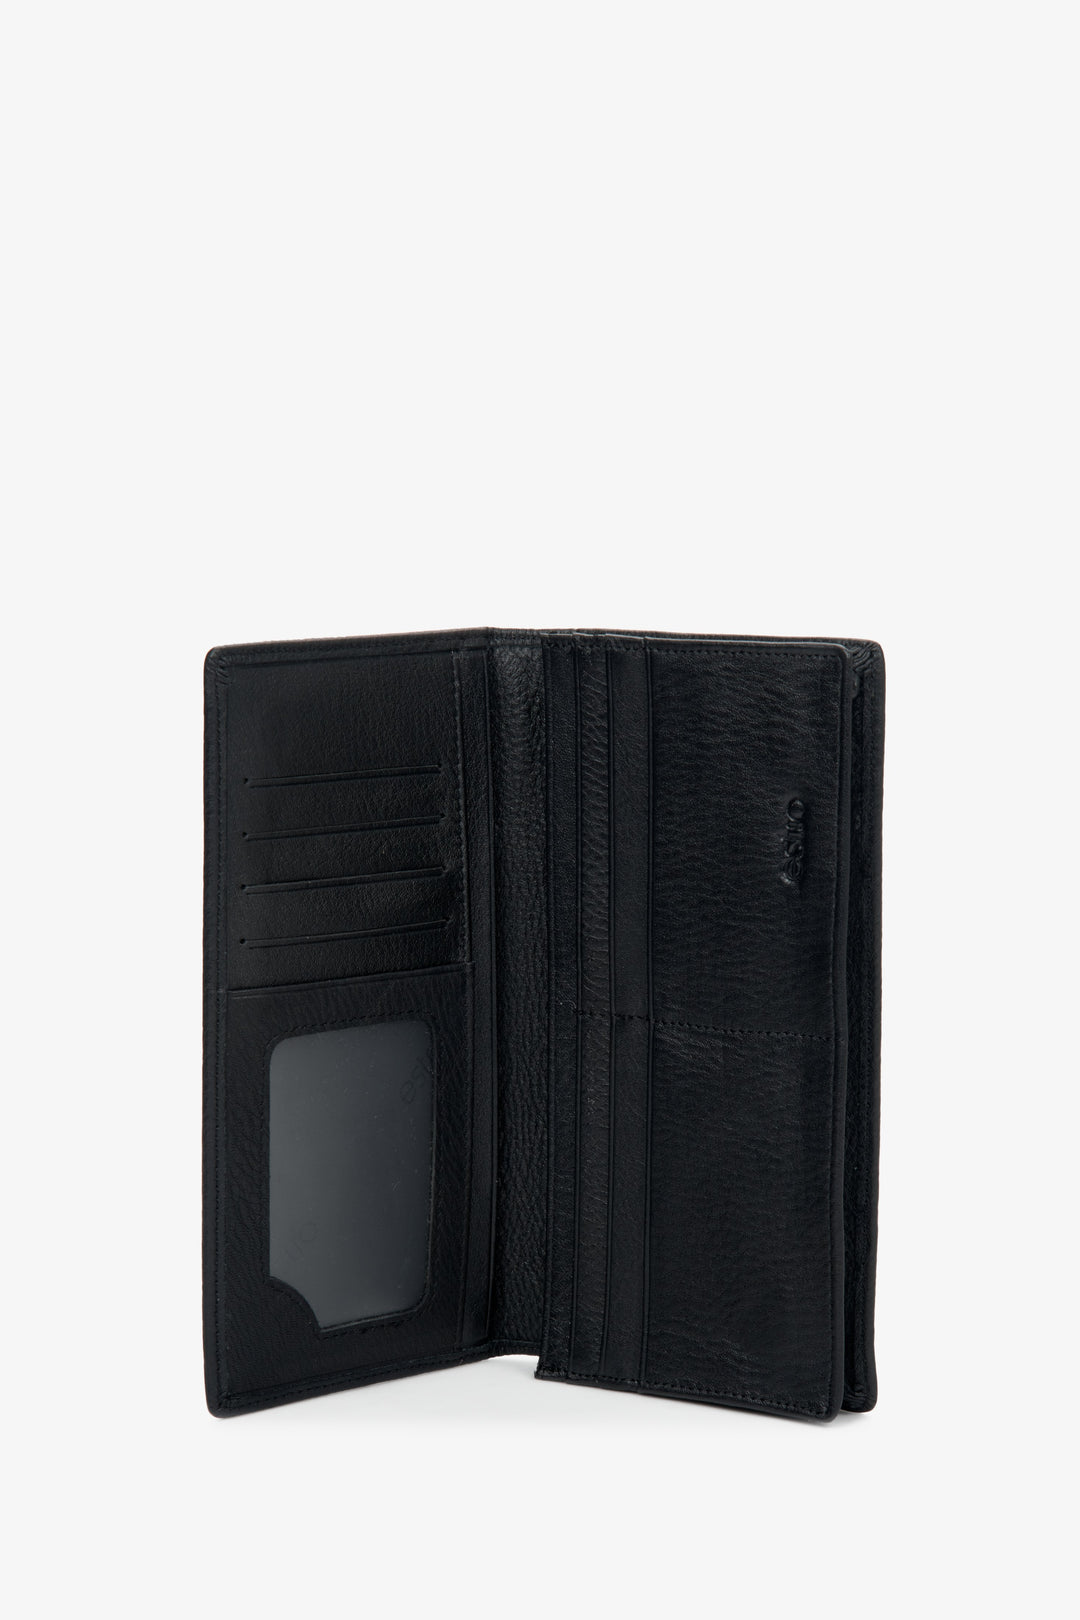 Estro large men's wallet made of genuine leather - interior of the model.